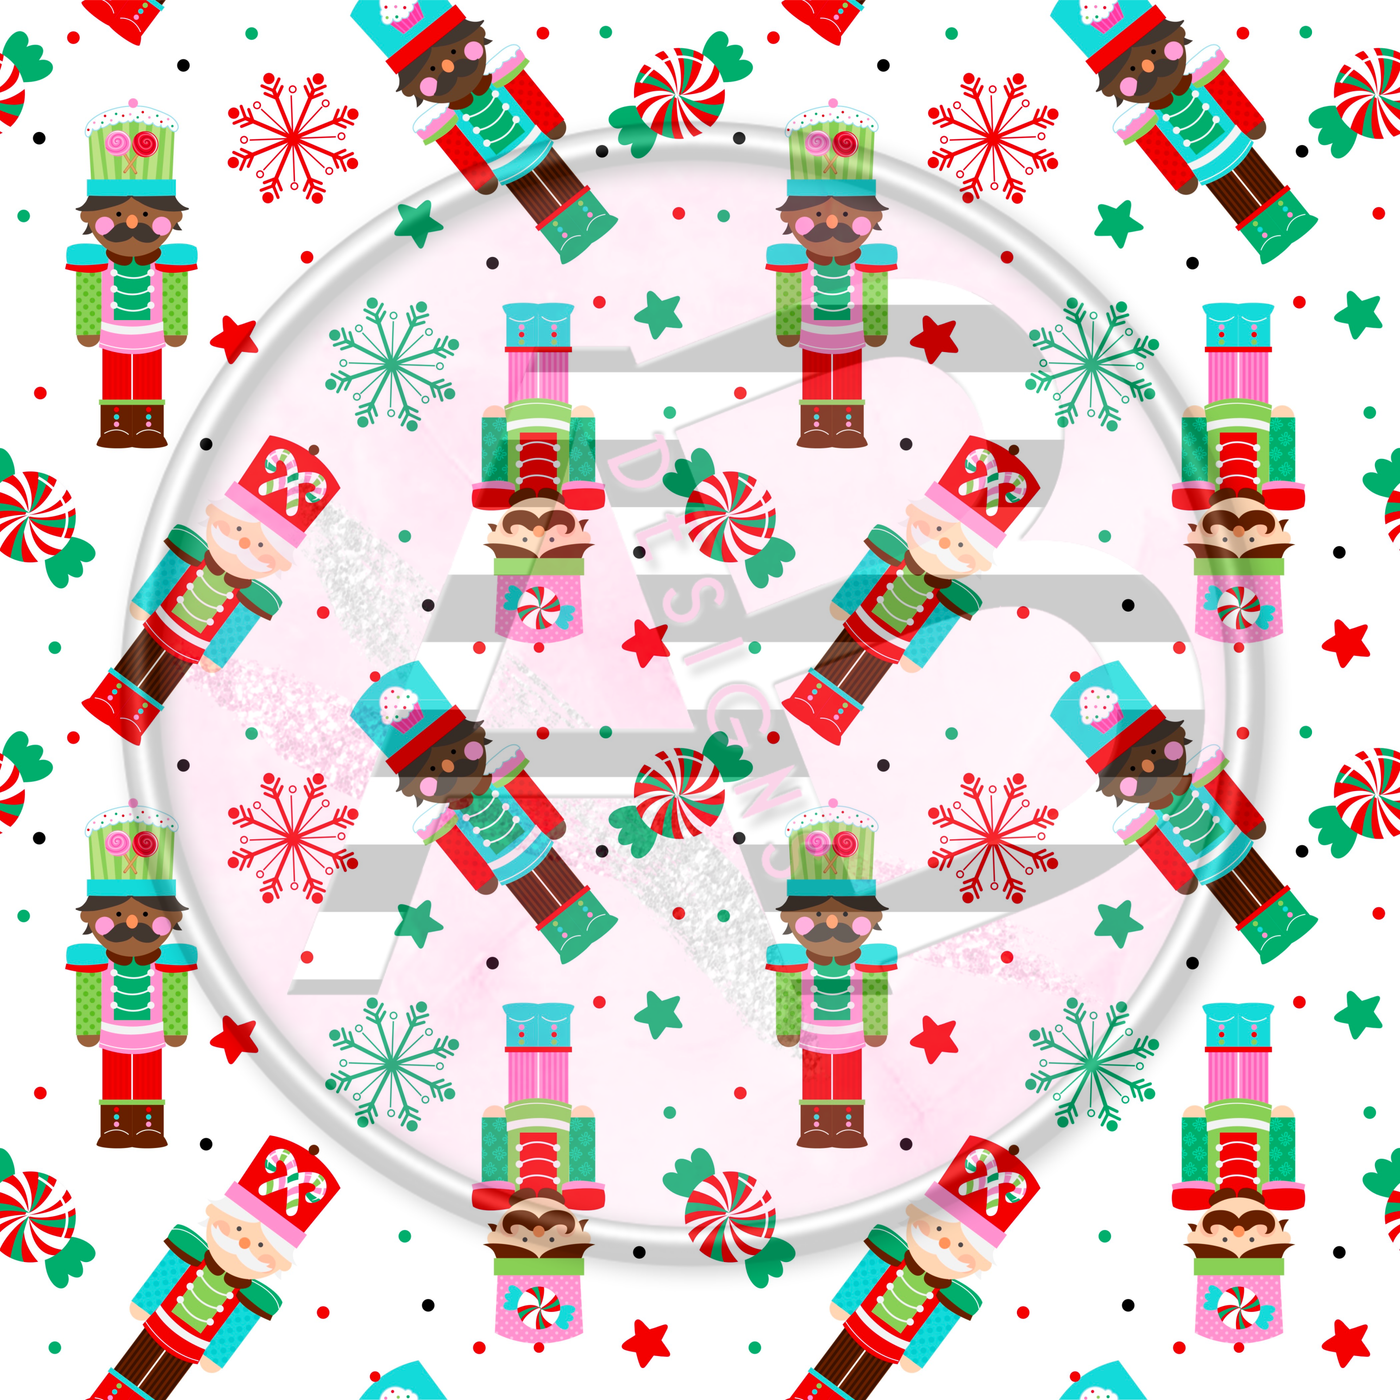 Adhesive Patterned Vinyl - Christmas 5022 Smaller